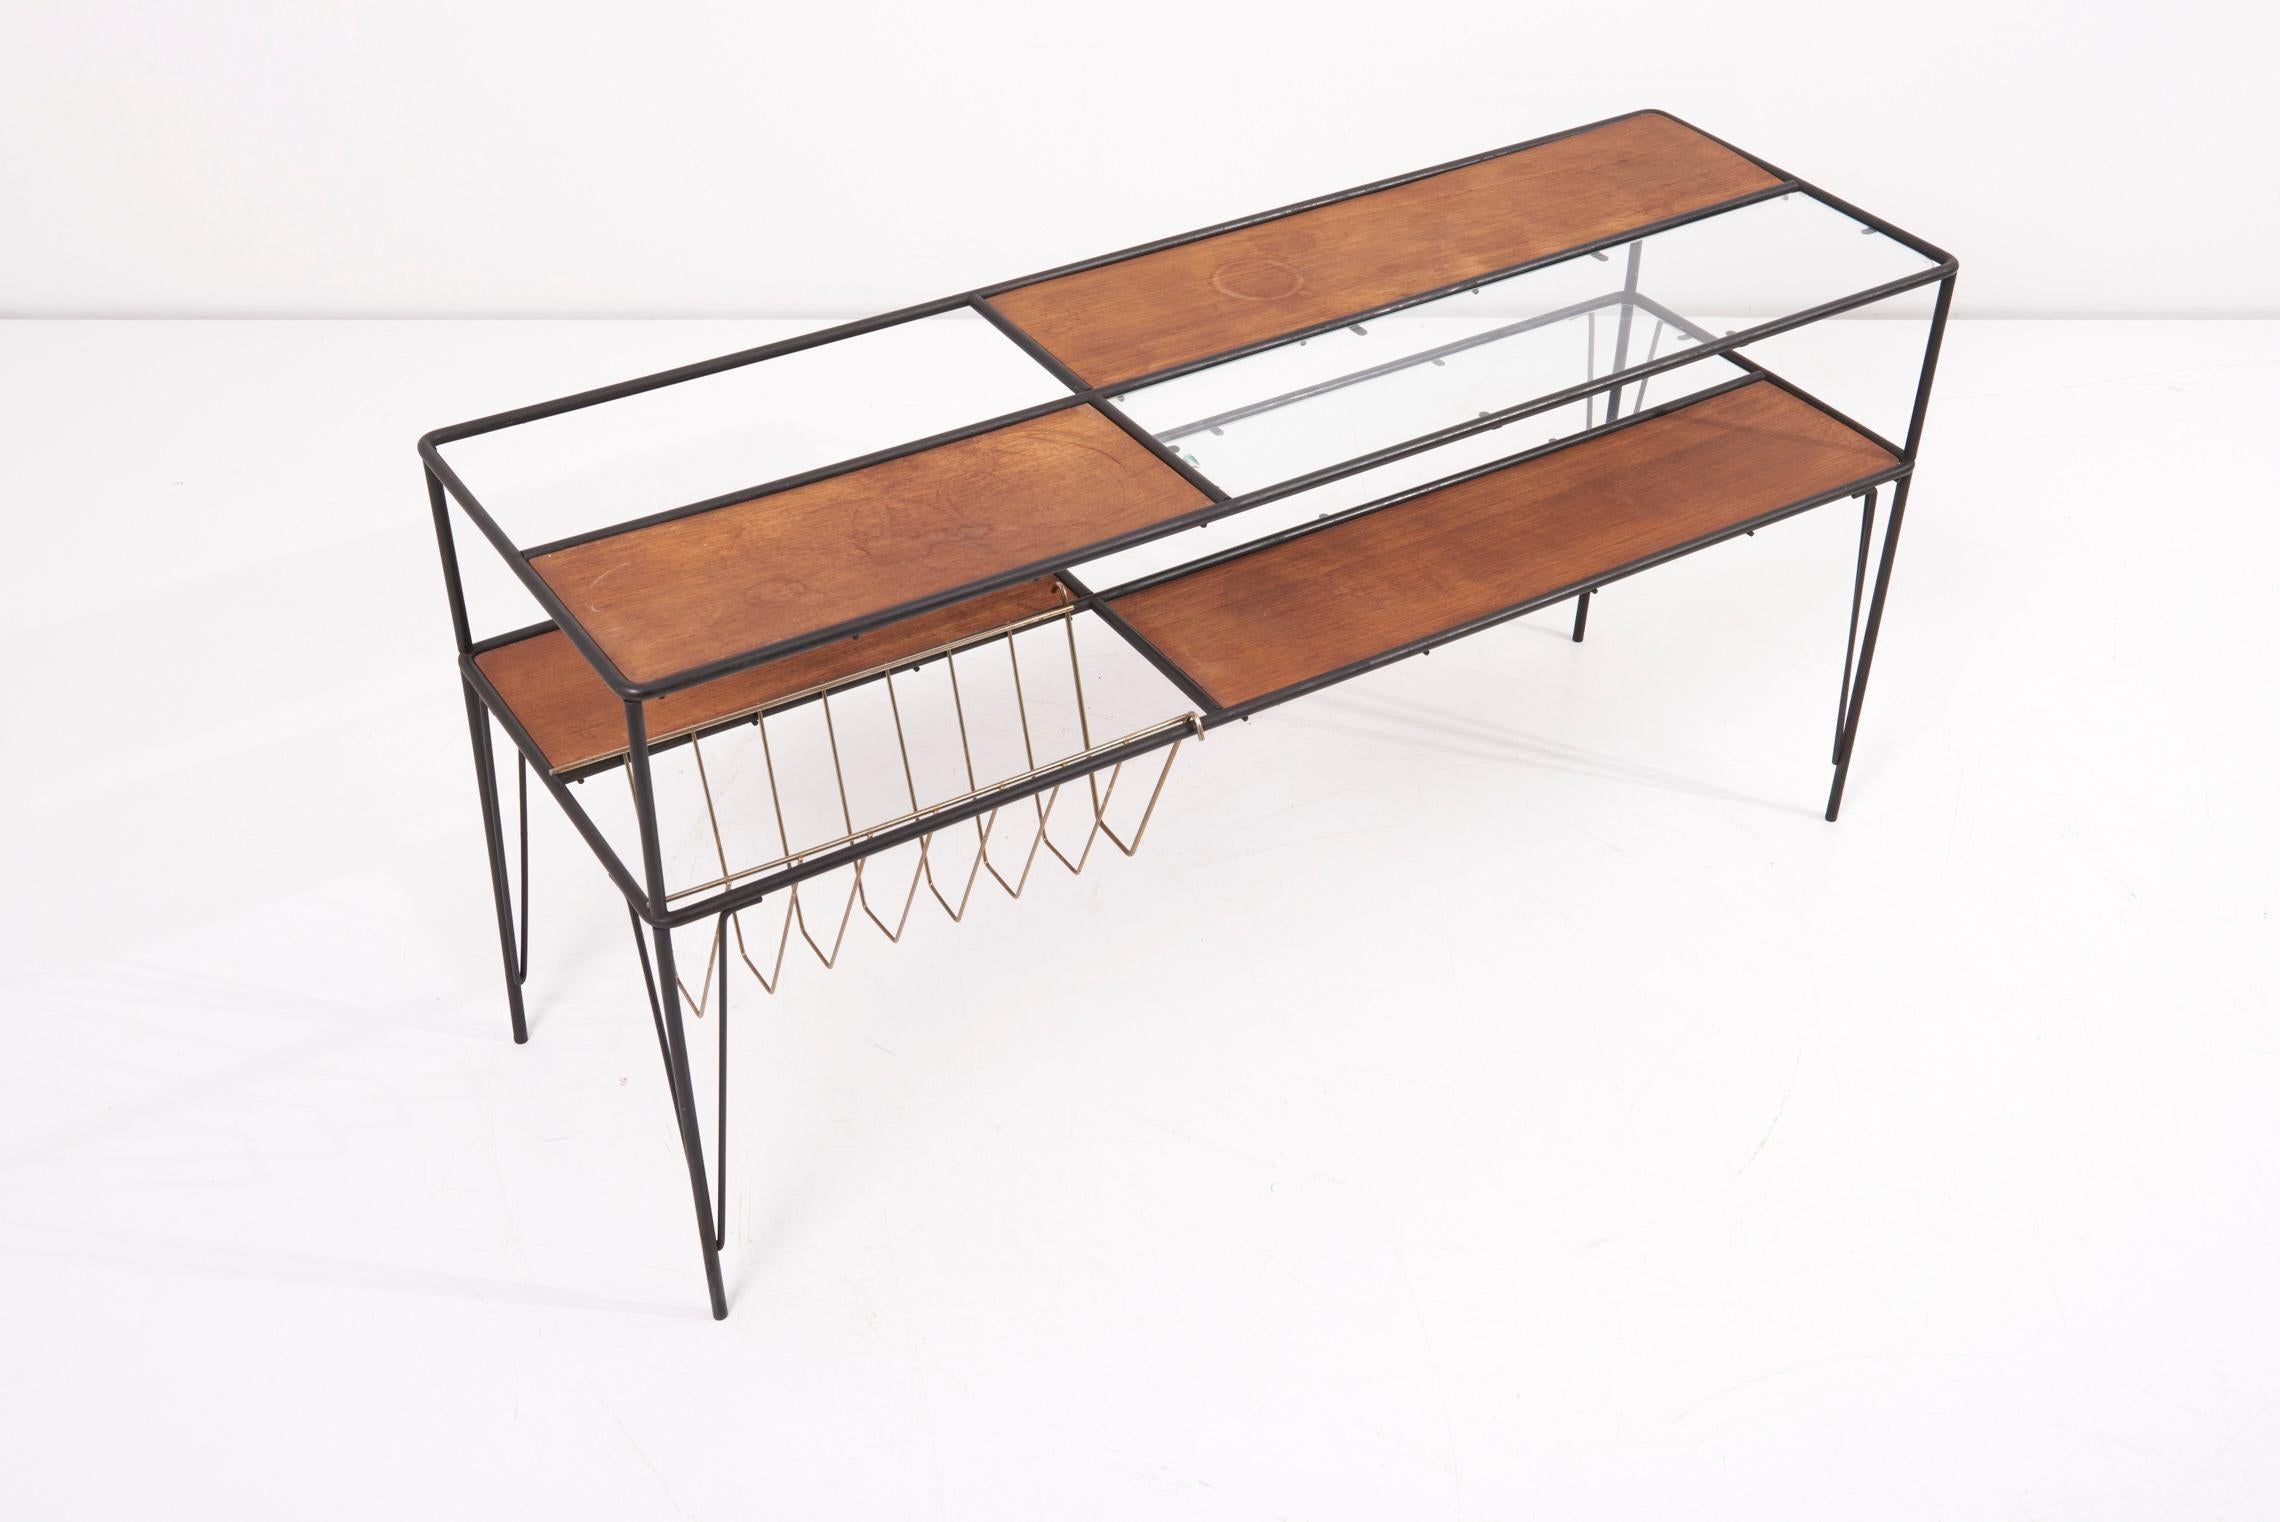 Mid-20th Century Modernist Magazine Rack or Side Coffee Table in Metal, Wood and Glass, US 1950s For Sale